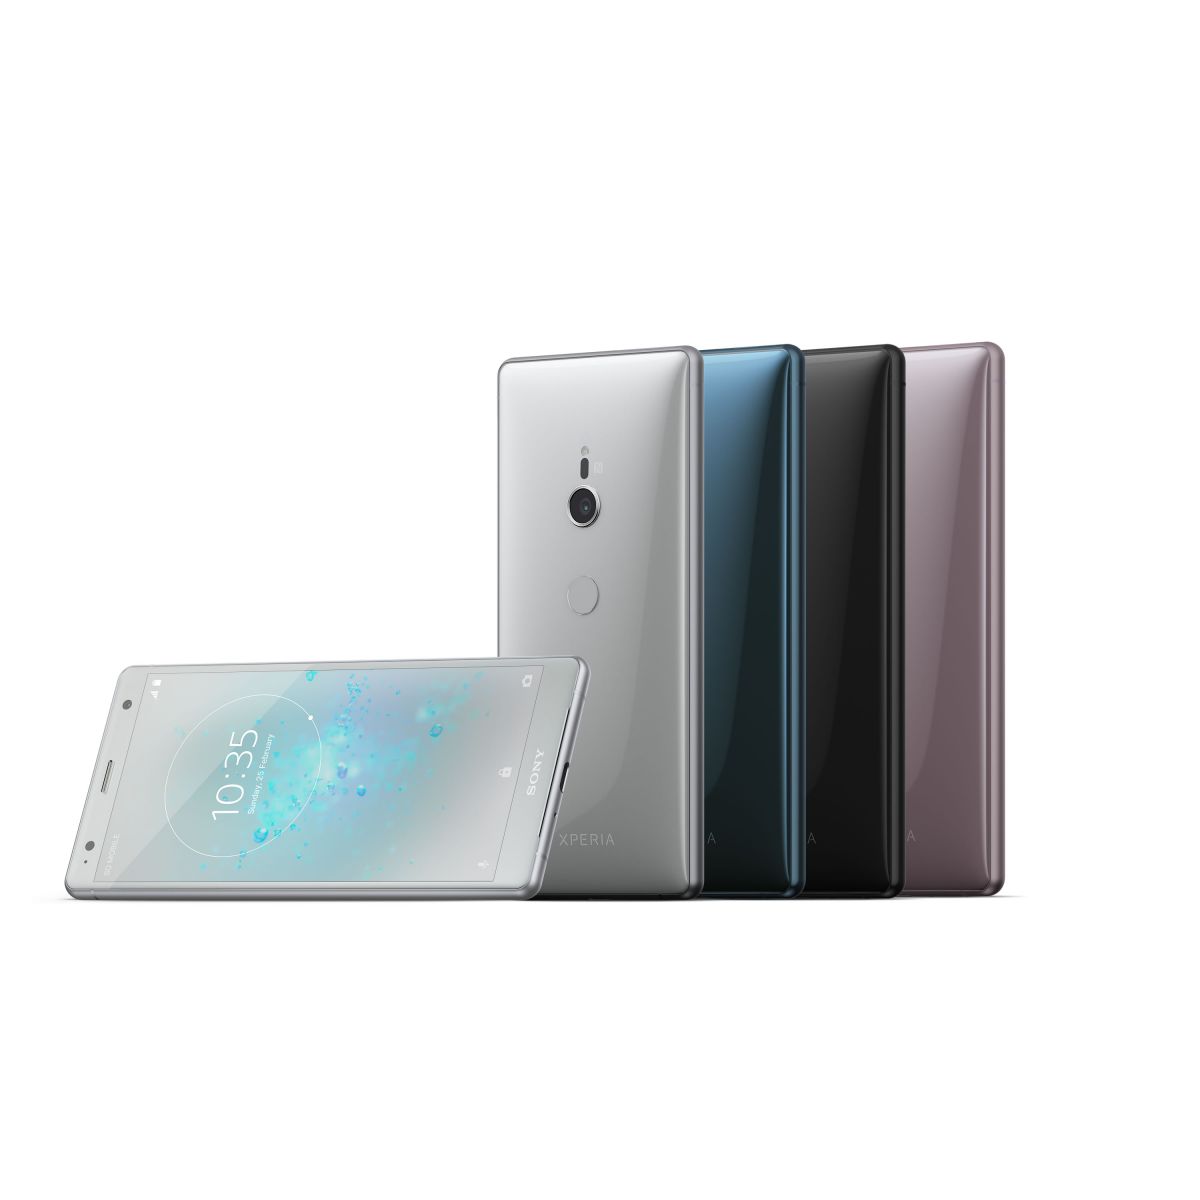 Sony unveils new flagship Xperia range in Malaysia